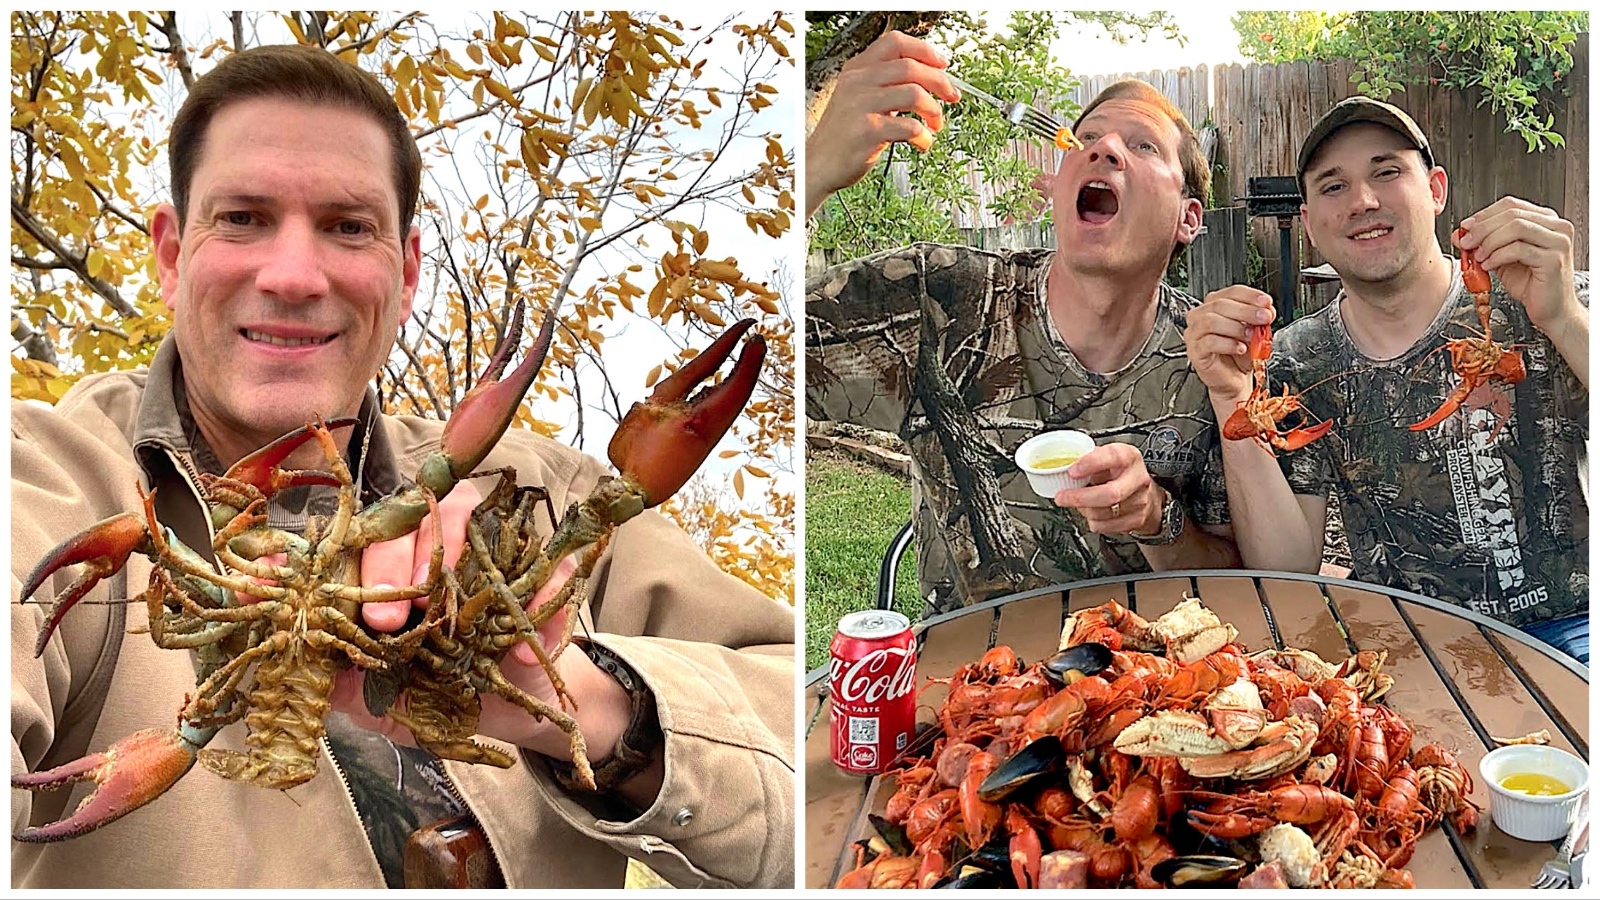 Not Only Is Wyoming A Great Place To Catch Crawfish, They're Huge